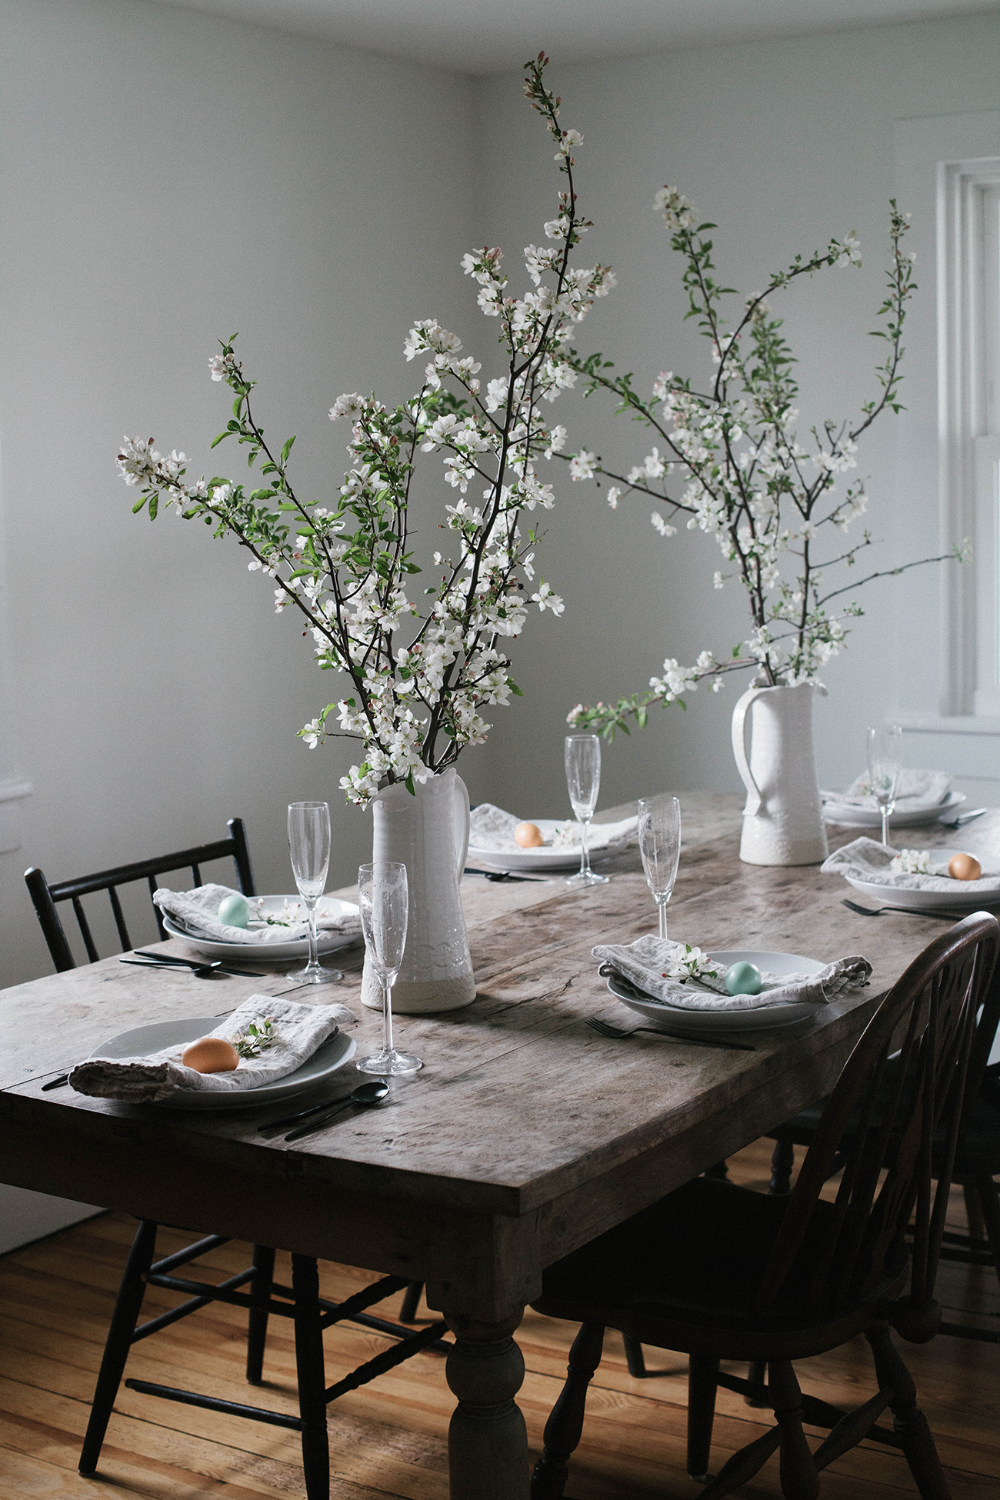 Gatherings _ A Simple Easter Table & Brunch Menu - A Daily Something